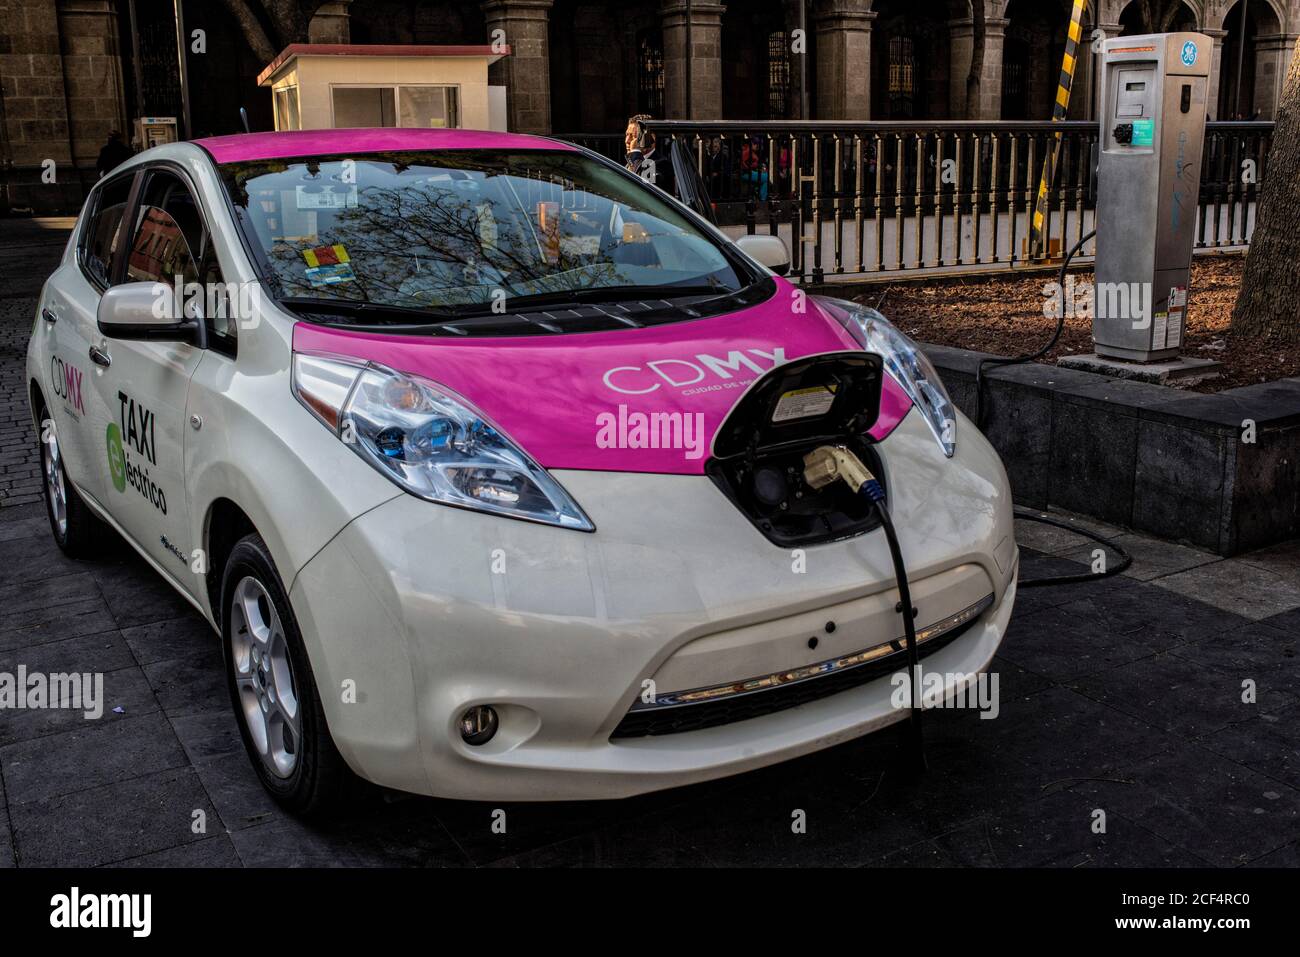 North America - Mexico, capital city Mexico City: There is a fleet of electric vehicles being used as taxis in the capital city, here a car is being c Stock Photo